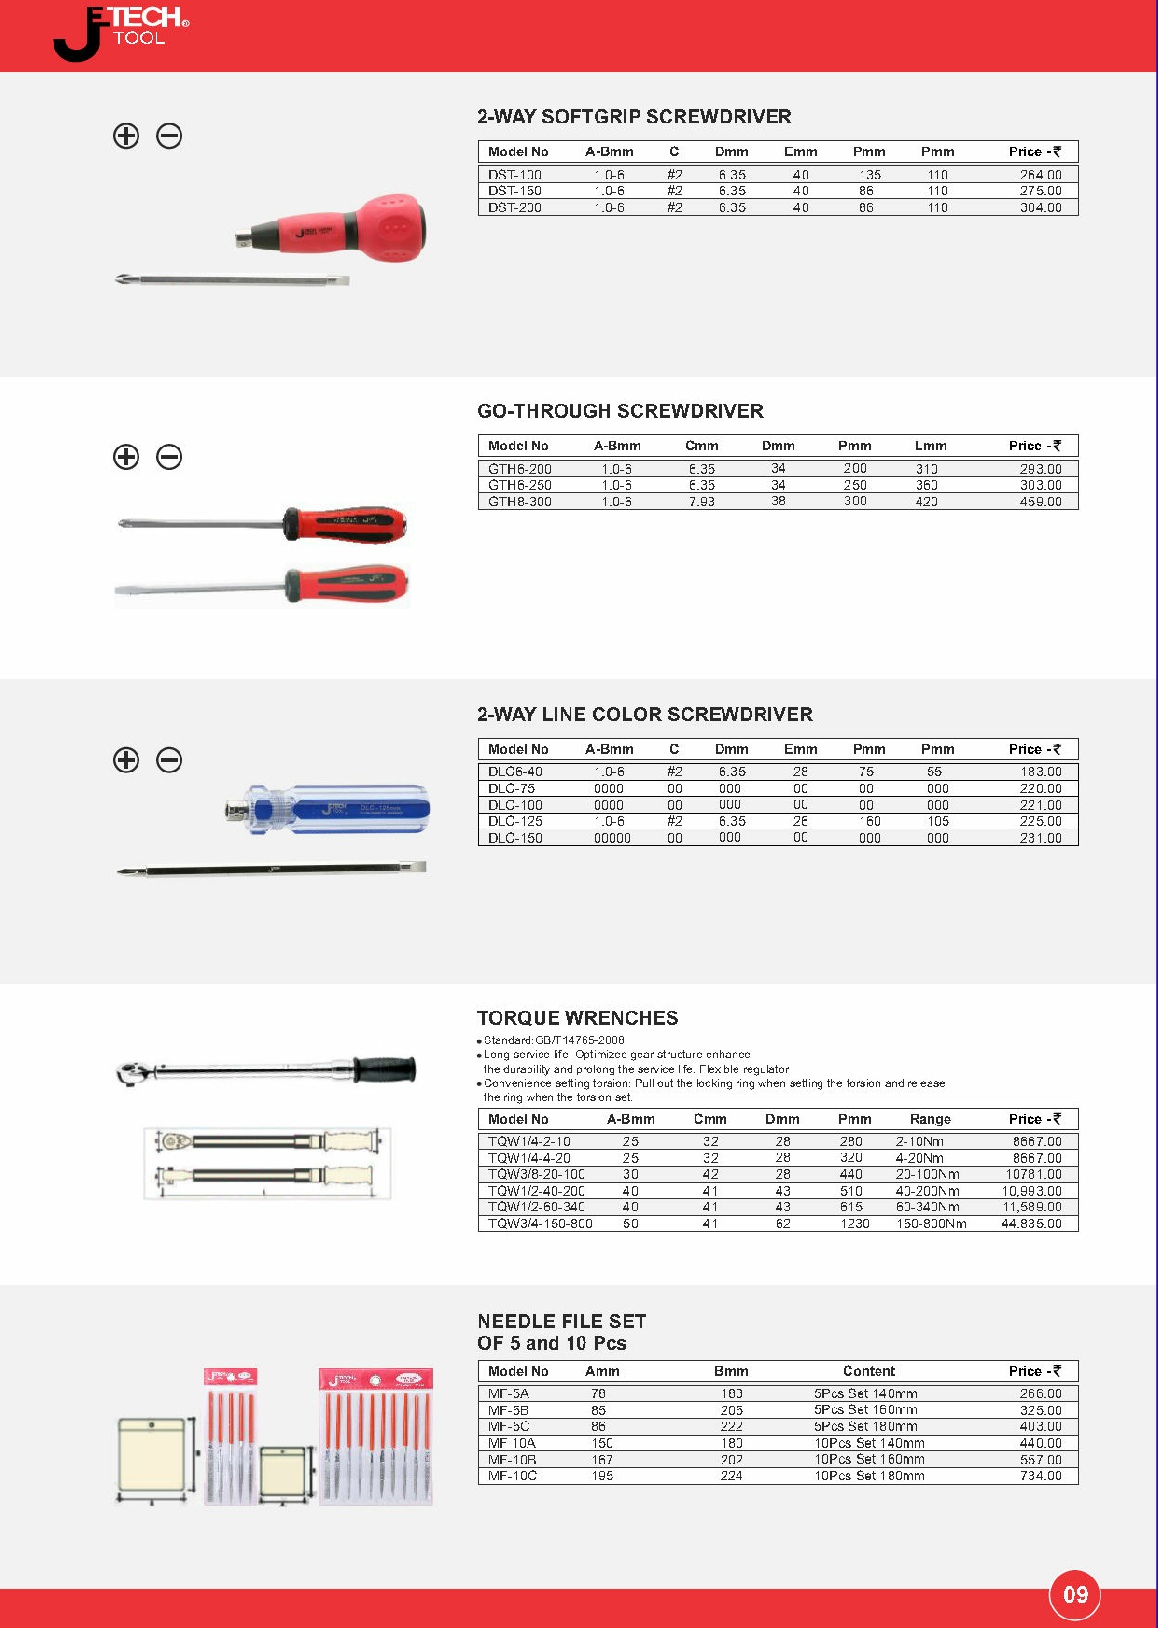 needle file set, torque wrenches,go through screw drivers,way line screw driver,soft grip screw drivers,Jetech tools,Chennai